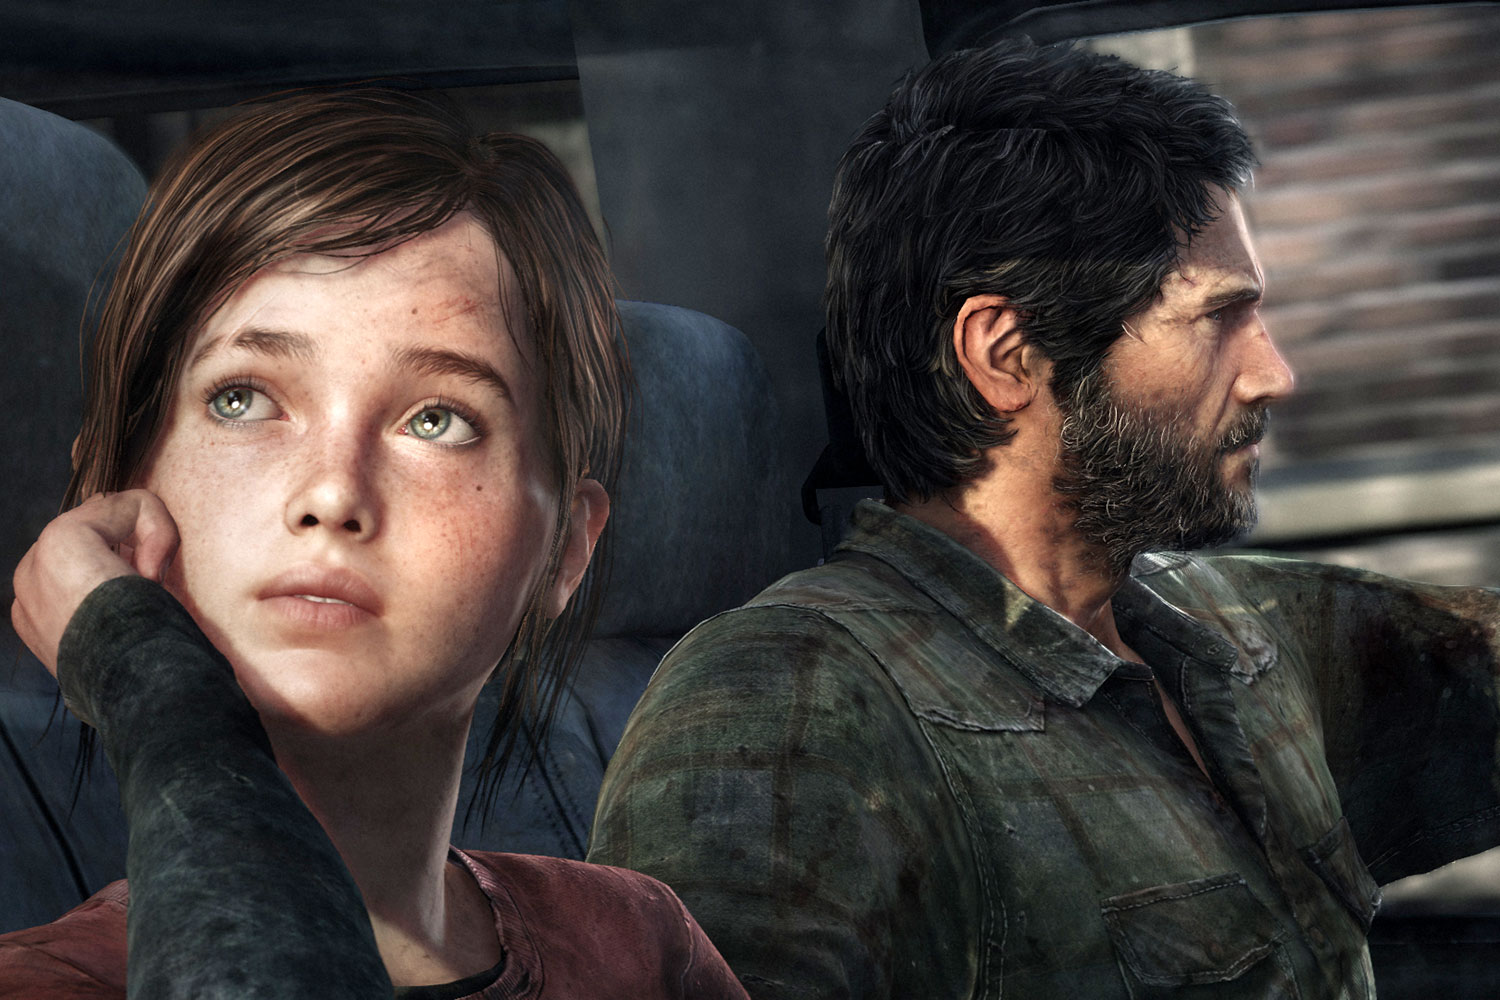 Cancelled The Last Of Us movie nearly cast Maisie Williams as Ellie